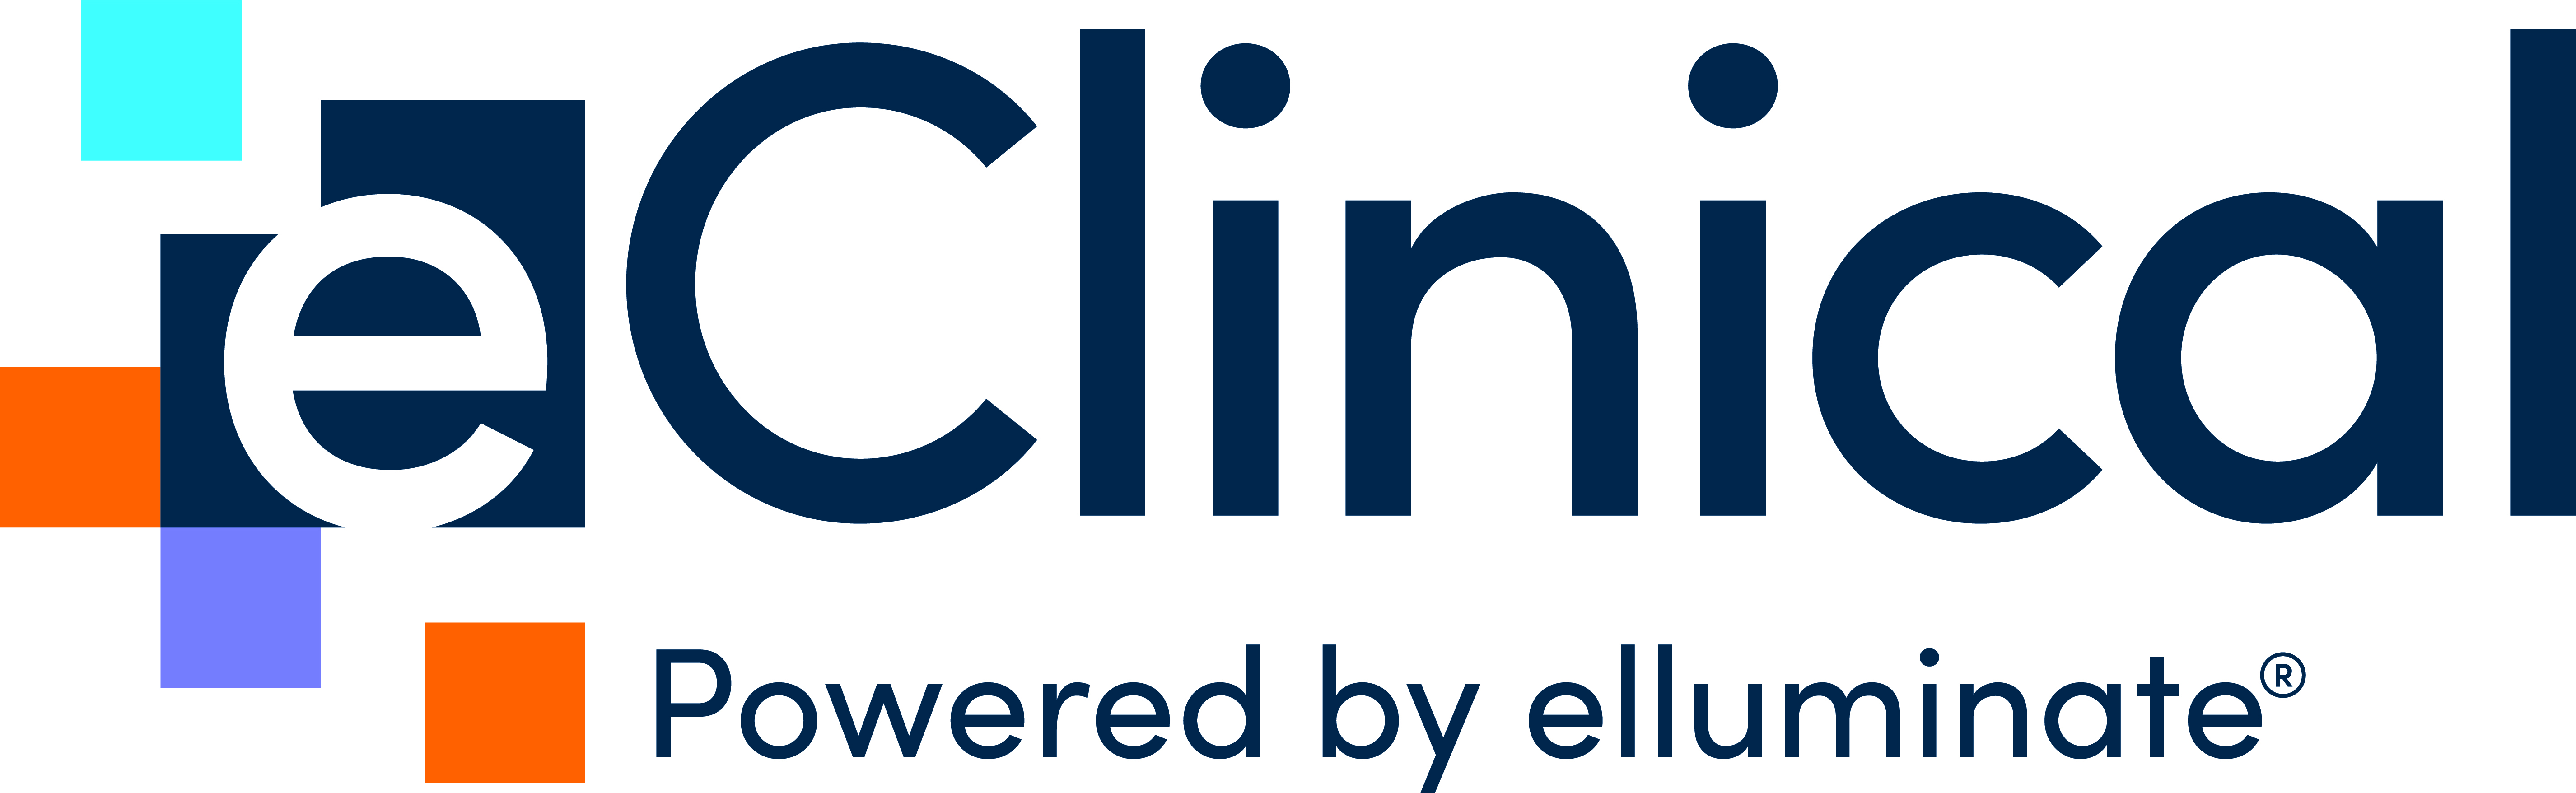 eClinical-primary-logo-full-color-positive-CMYK (2)